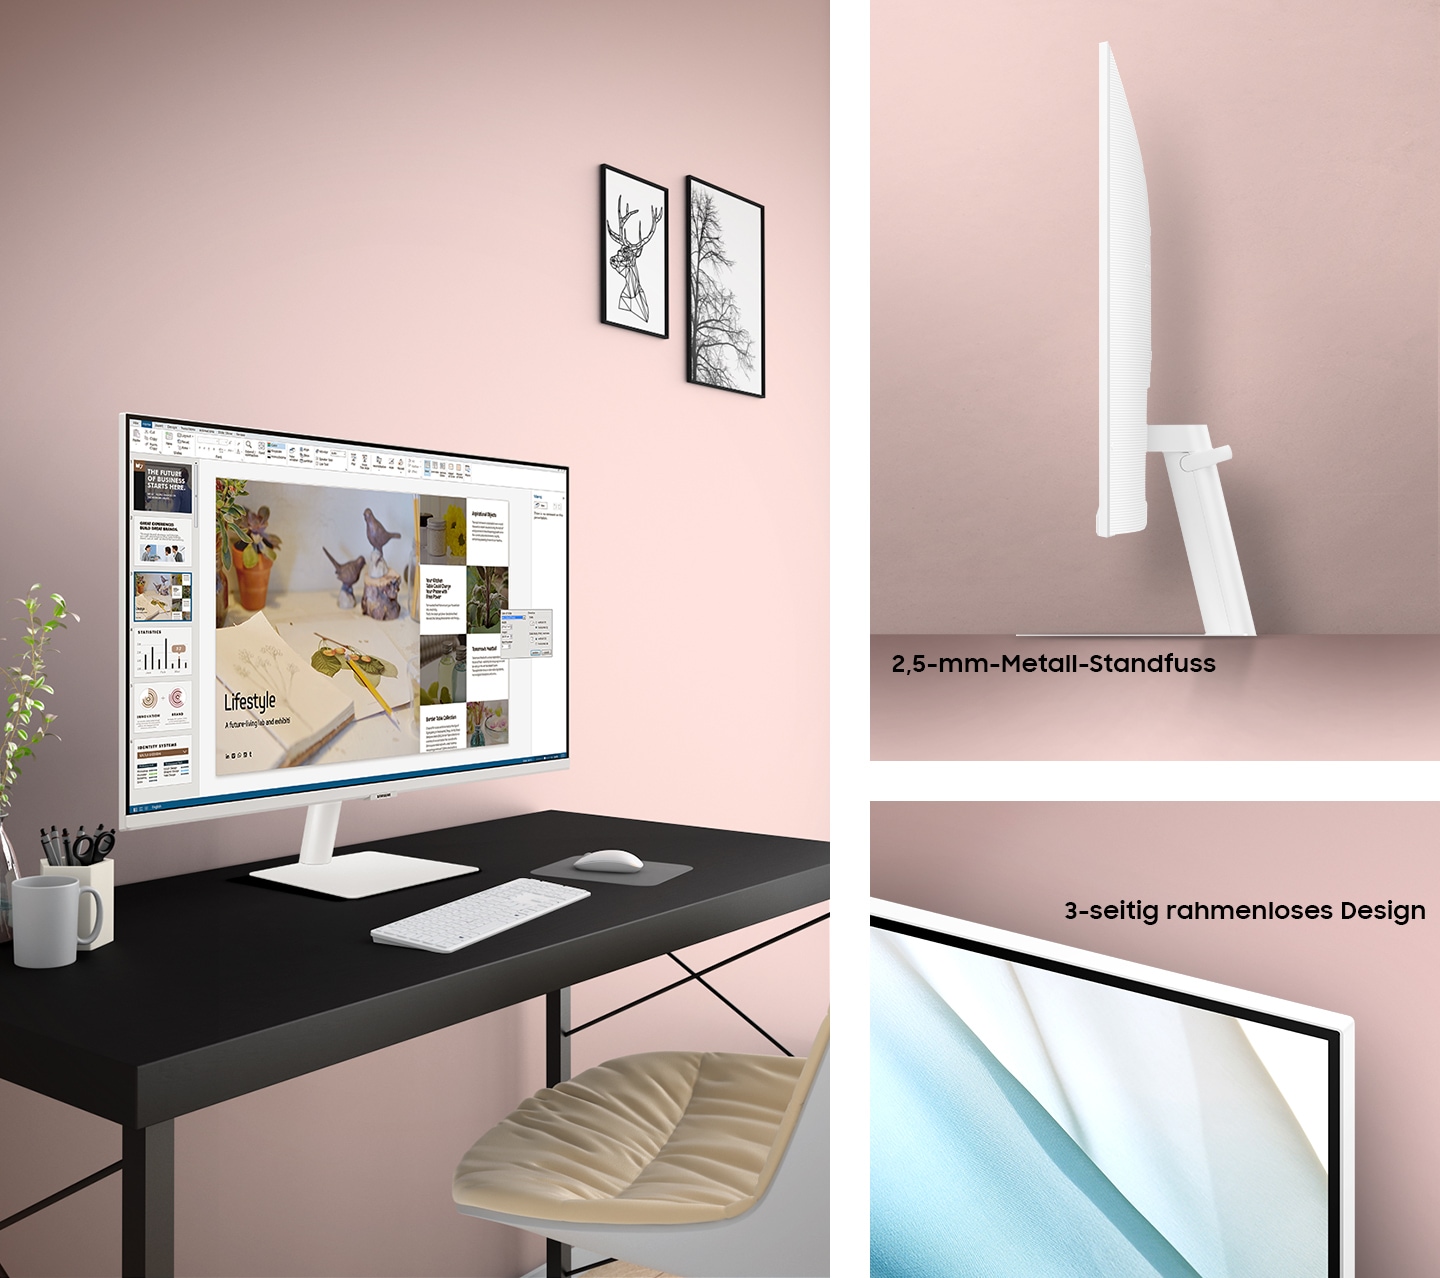 The M5 Monitor is on the desk. Sleek design is represented through the slim side. It shows a close-up of a slim metal stand, 3-sided borderless design.